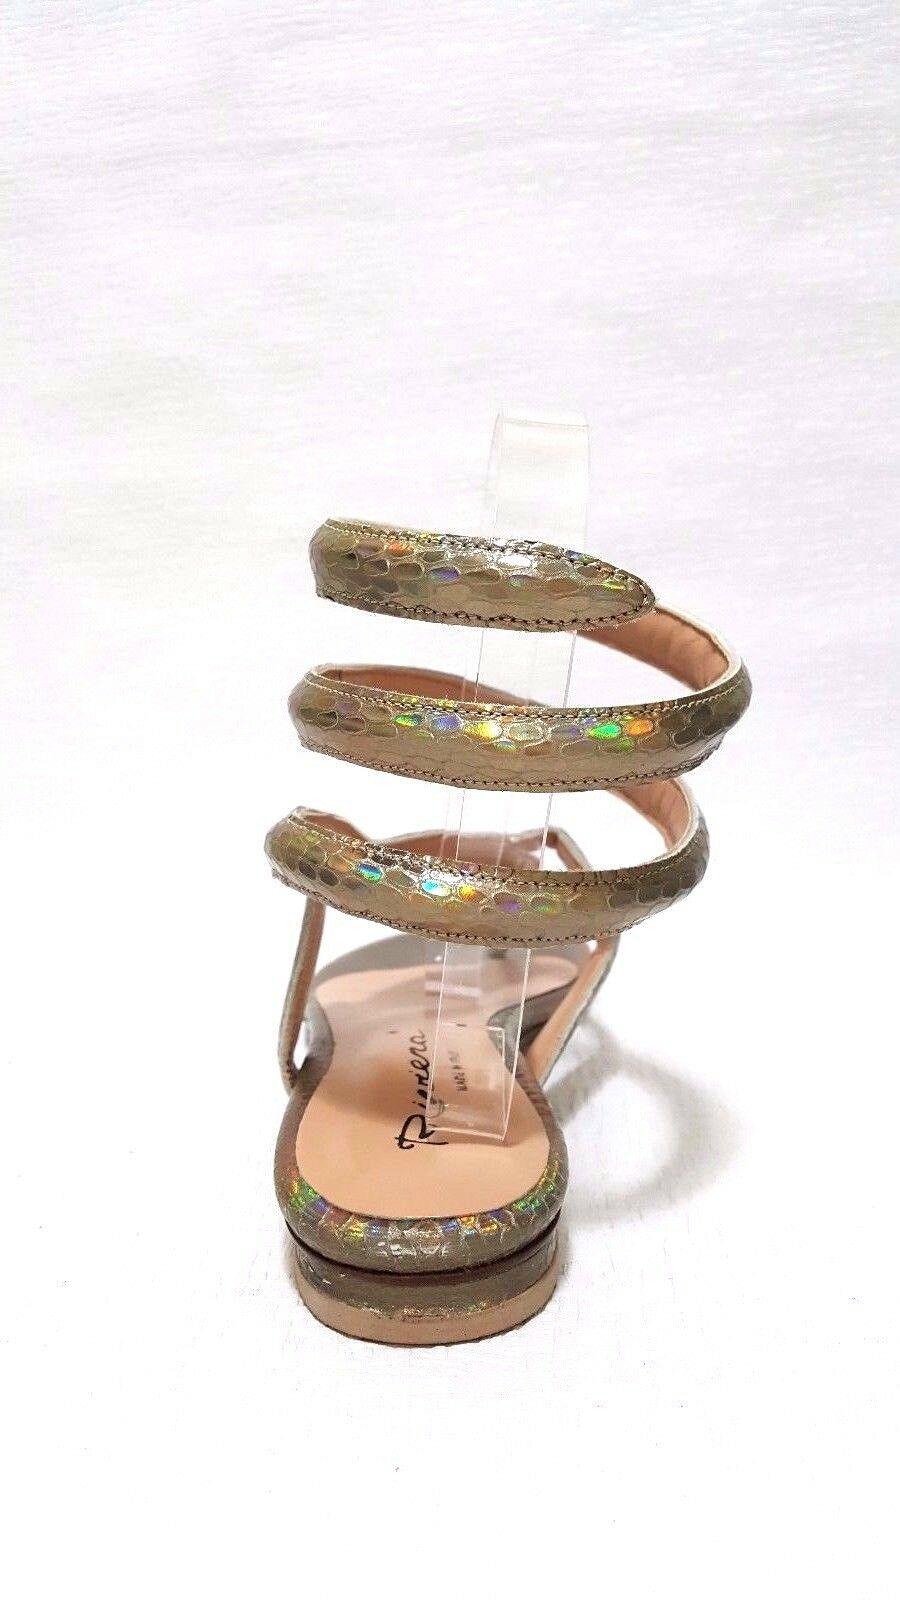 RIVIERA Women's Sandals Leather Gold Cobra Taupe Made in Italy  EU 37 US  6 - SVNYFancy